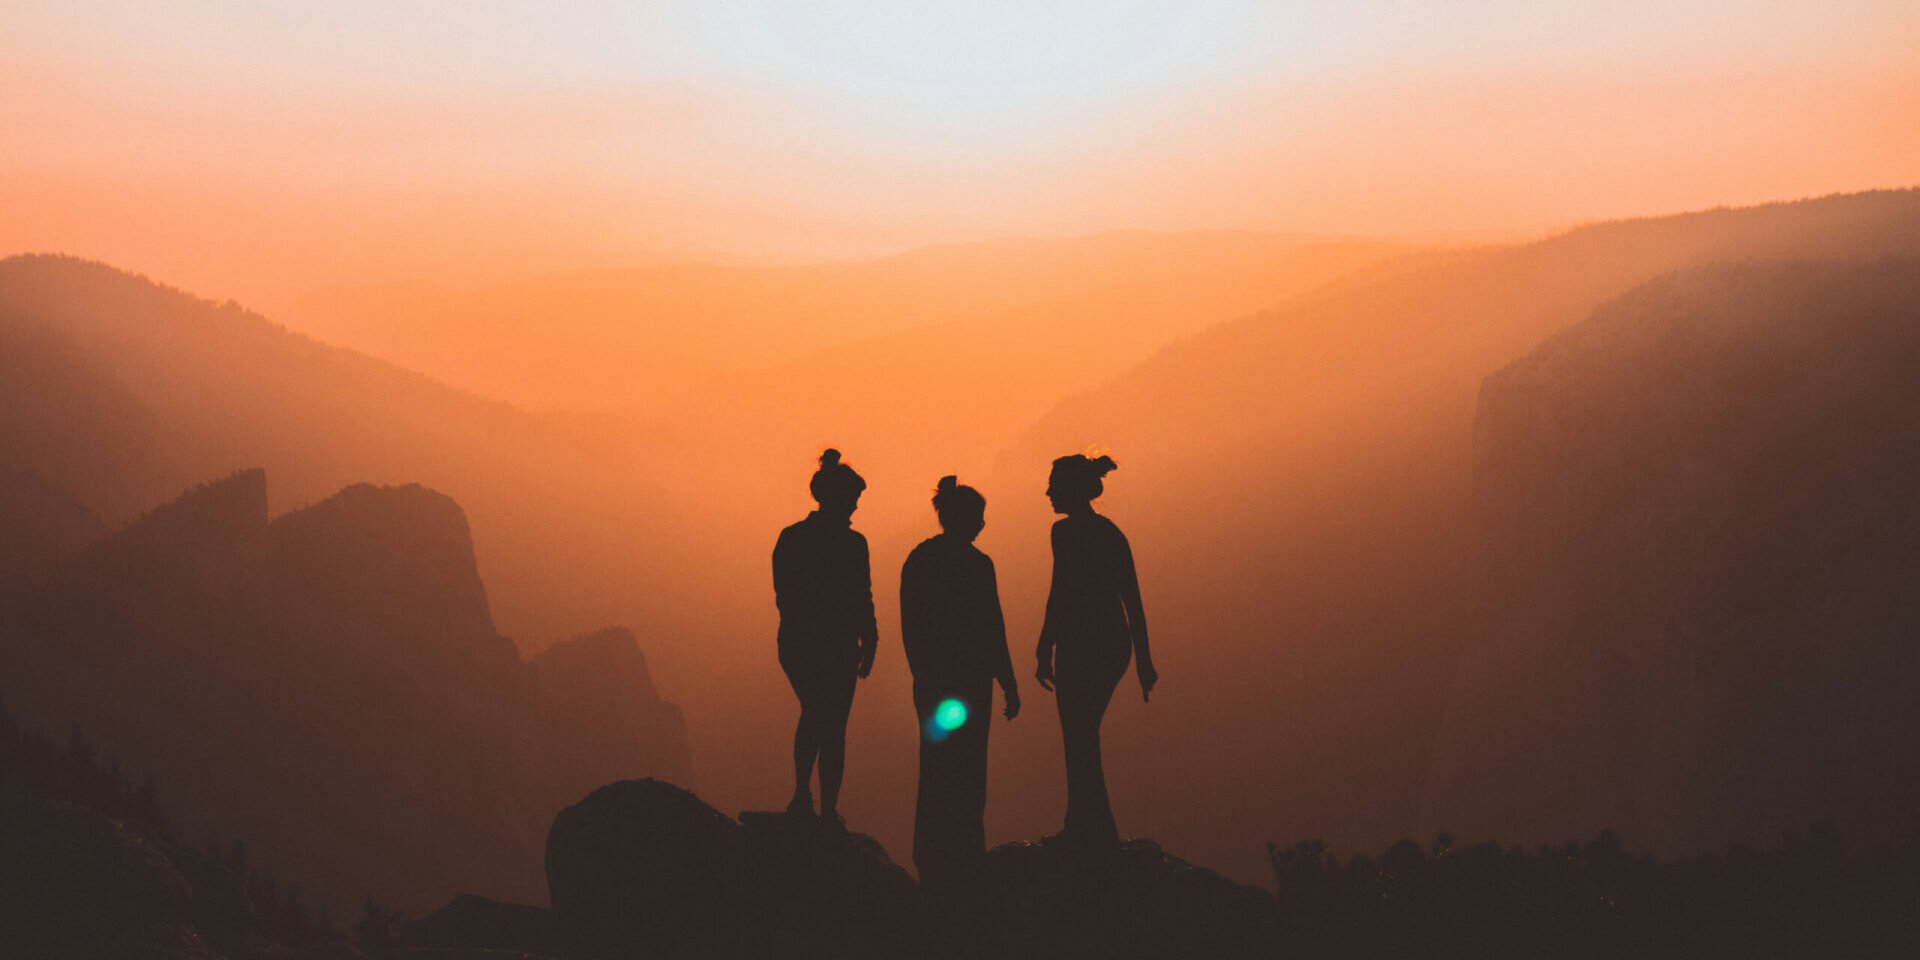 Silhouette of three people on a mountain cliff with sunset in the background